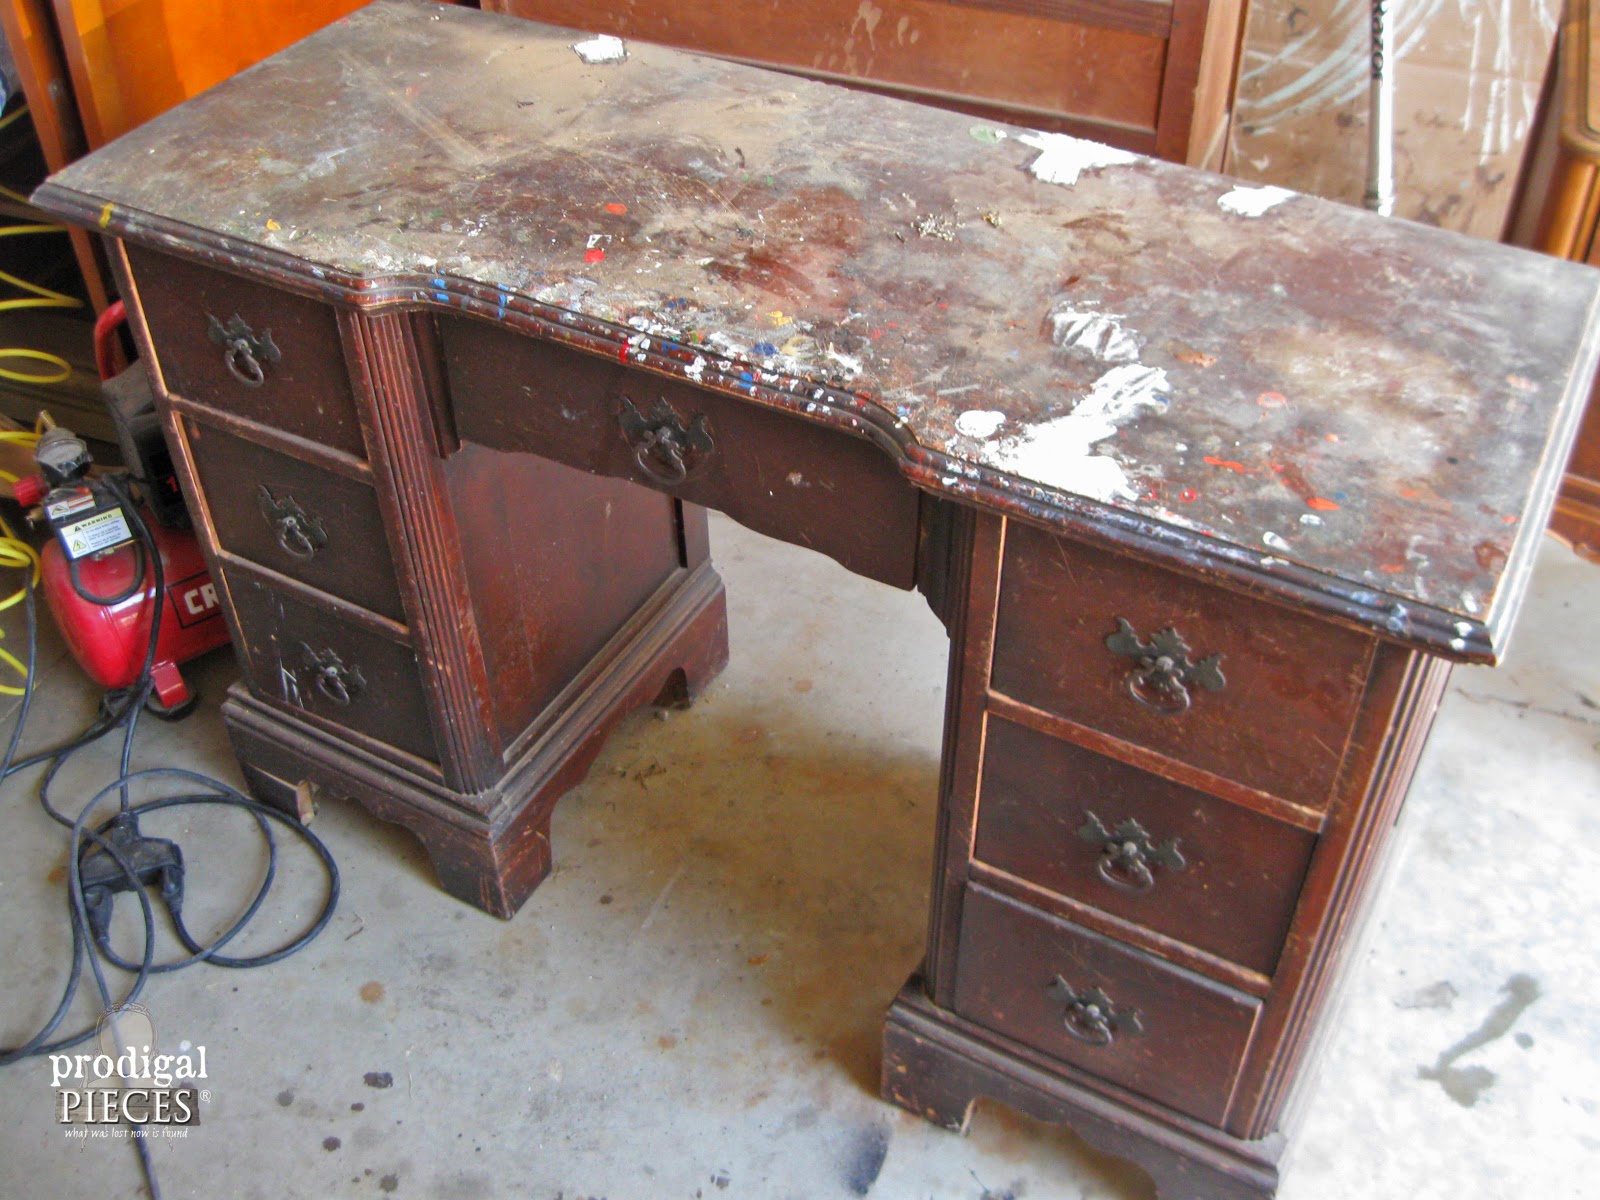 The Ugly Duckling Dressing Table Makeover by Prodigal Pieces  http://www.prodigalpieces.com